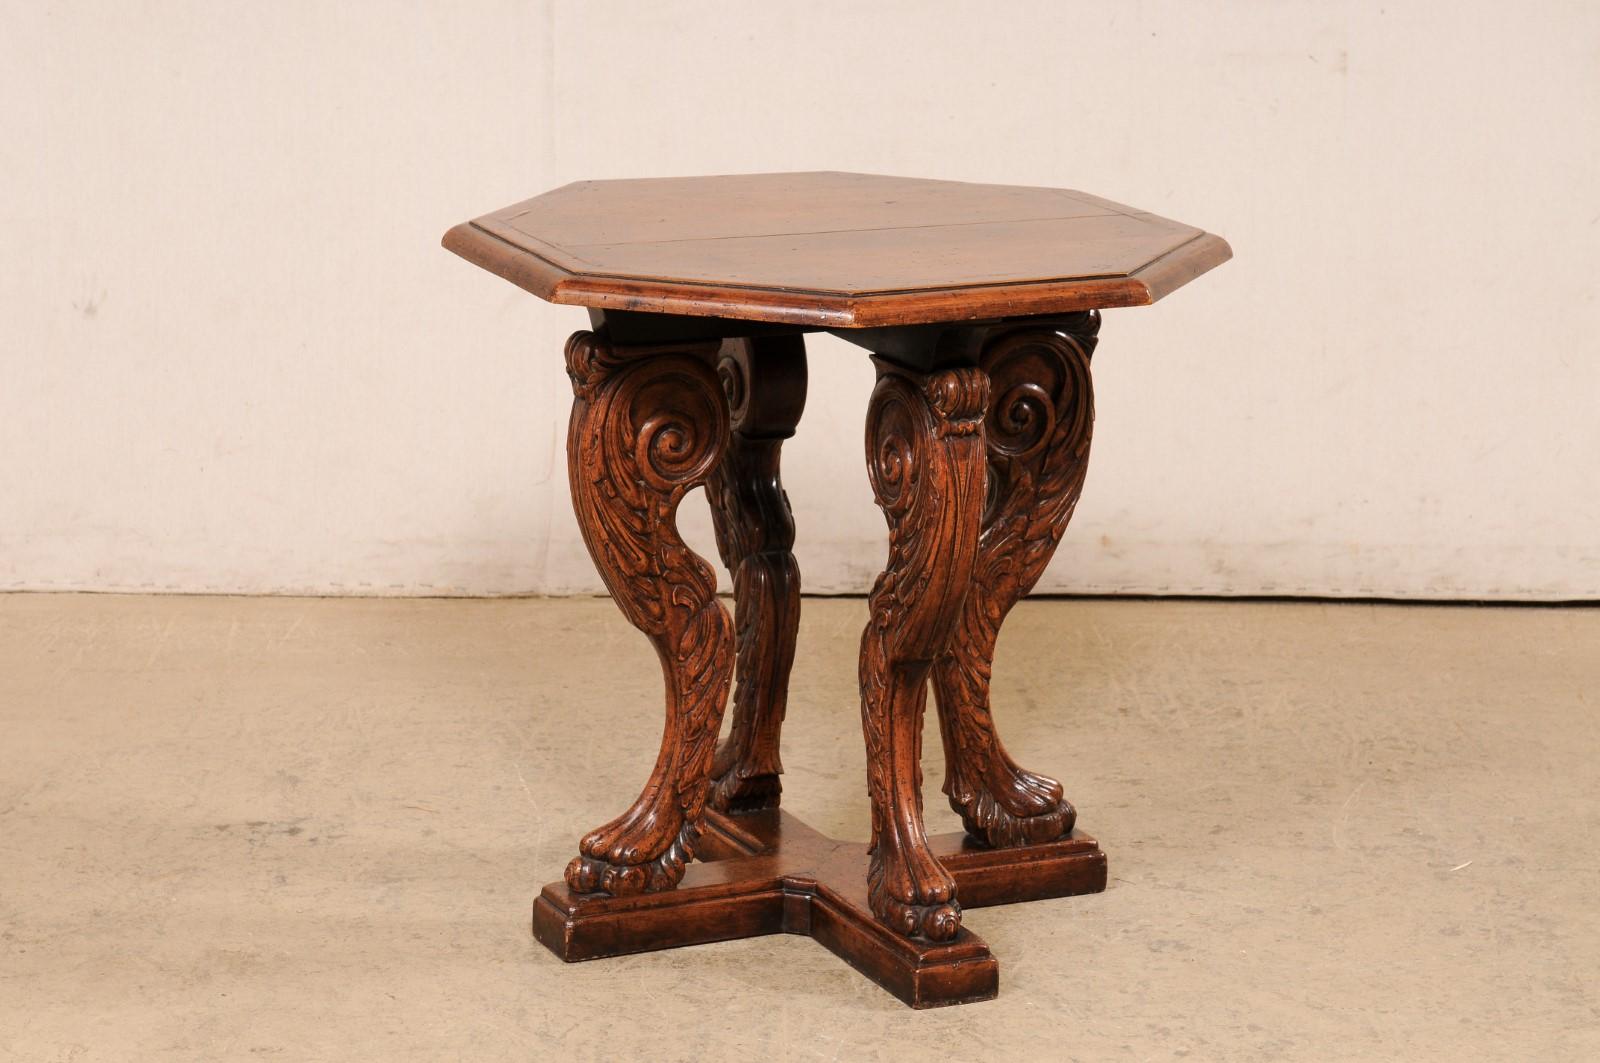 An English beautifully-carved and octagonally shaped table from the mid 20th century. This vintage gueridon-style table from England features an octagonal top which is raised upon four ornately carved legs (three-dimensionally) in the likeliness of